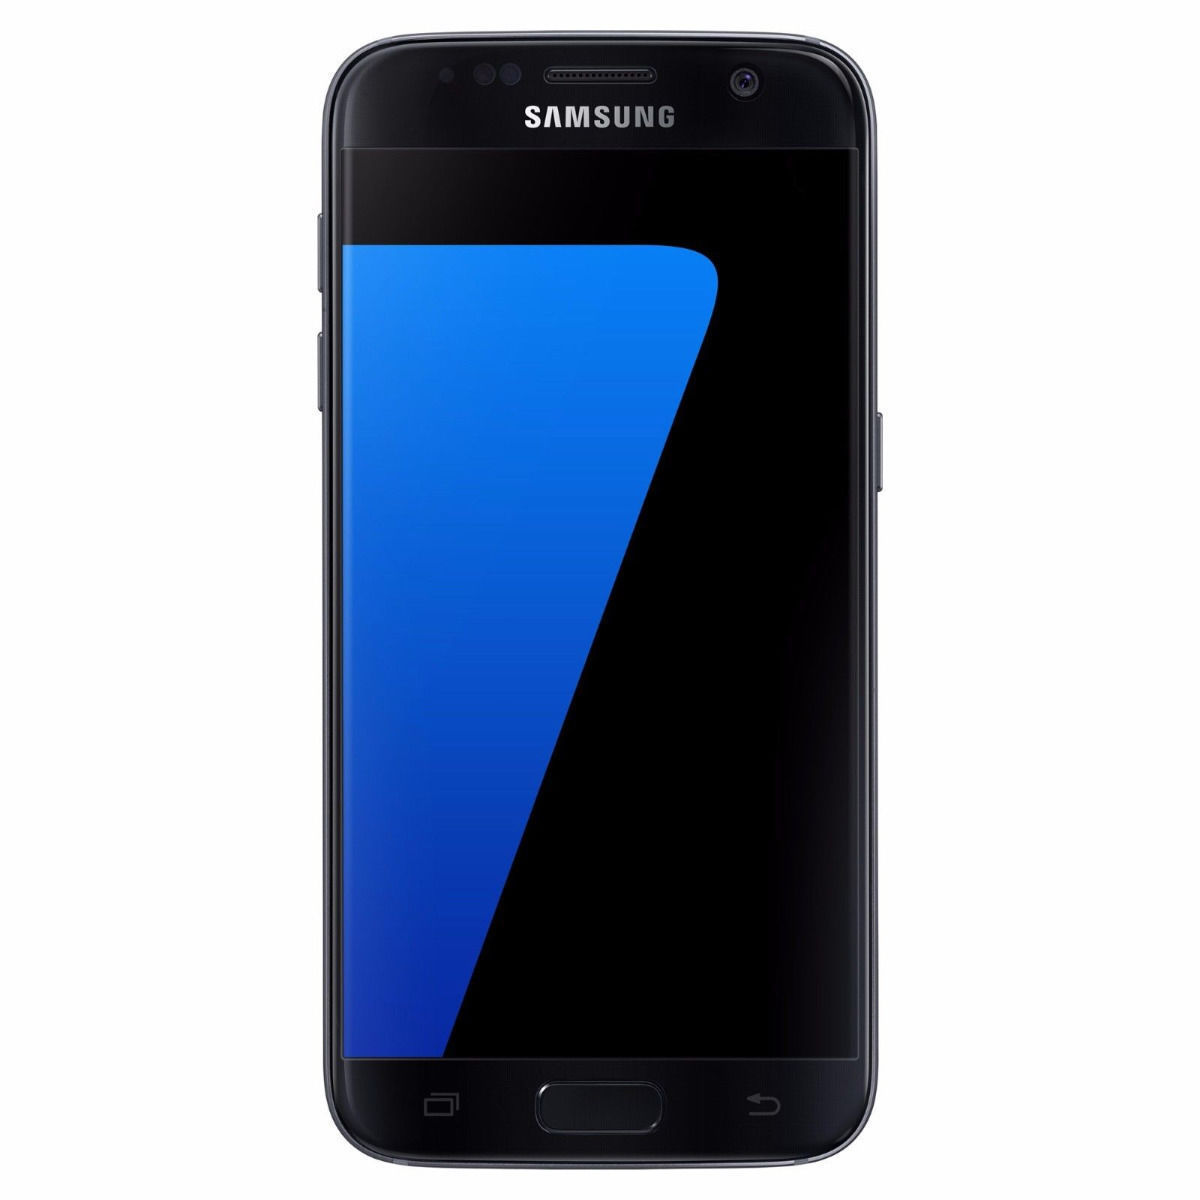 Samsung Galaxy S7 32GB SM-G930T Unlocked GSM T-Mobile 4G LTE Android Black - $150.00